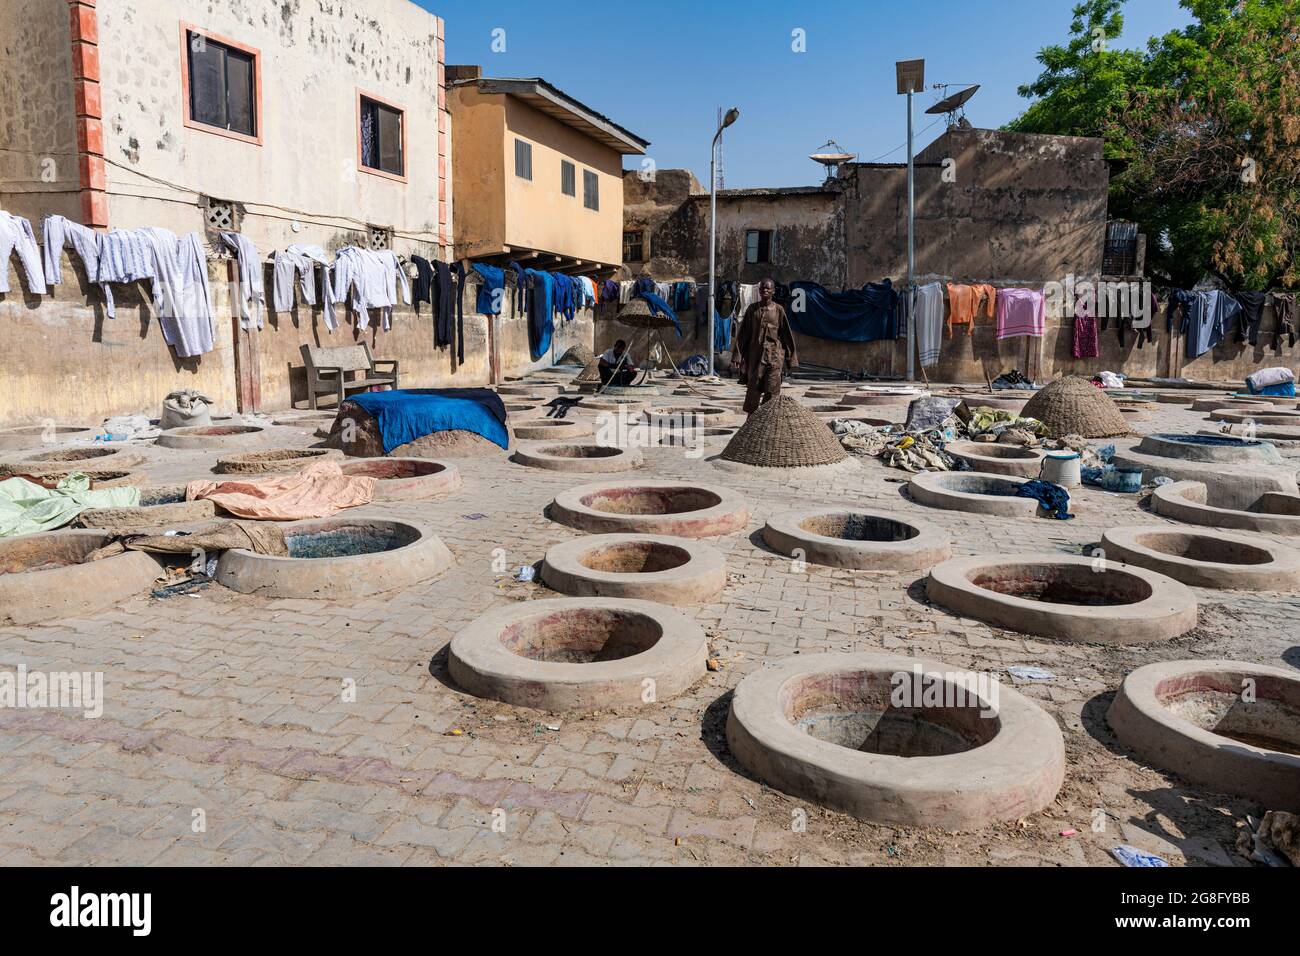 Dyeing pits, Kano, Kano state, Nigeria, West Africa, Africa Stock Photo